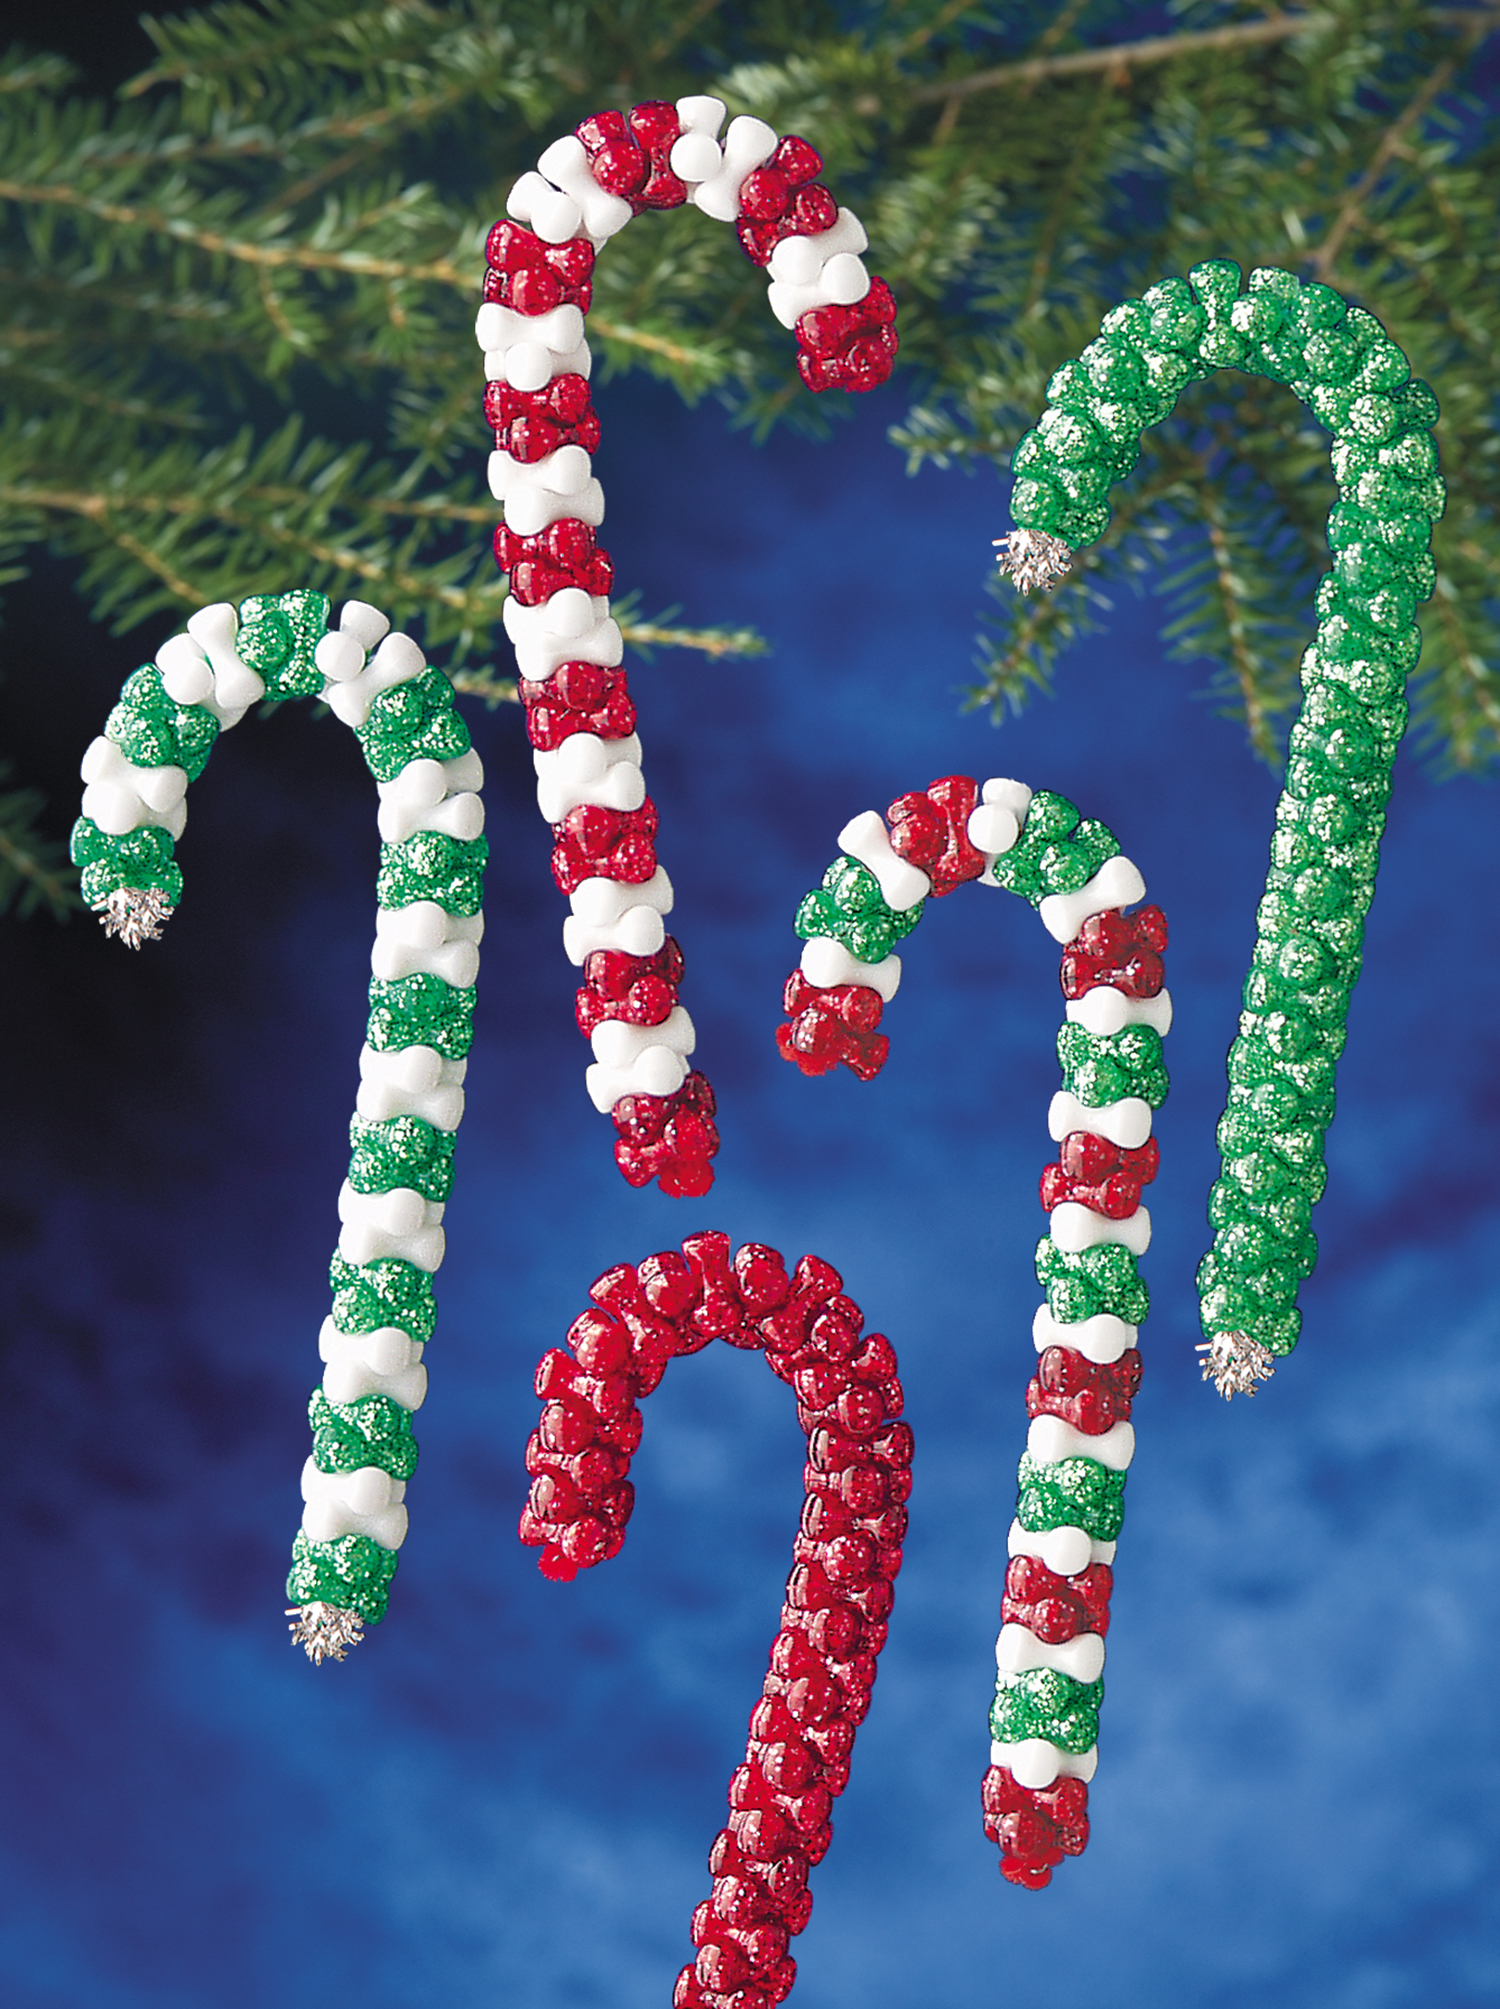 CANDY CANE ASSORTMENT HOLIDAY ORNAMENT KIT - image 1 of 2